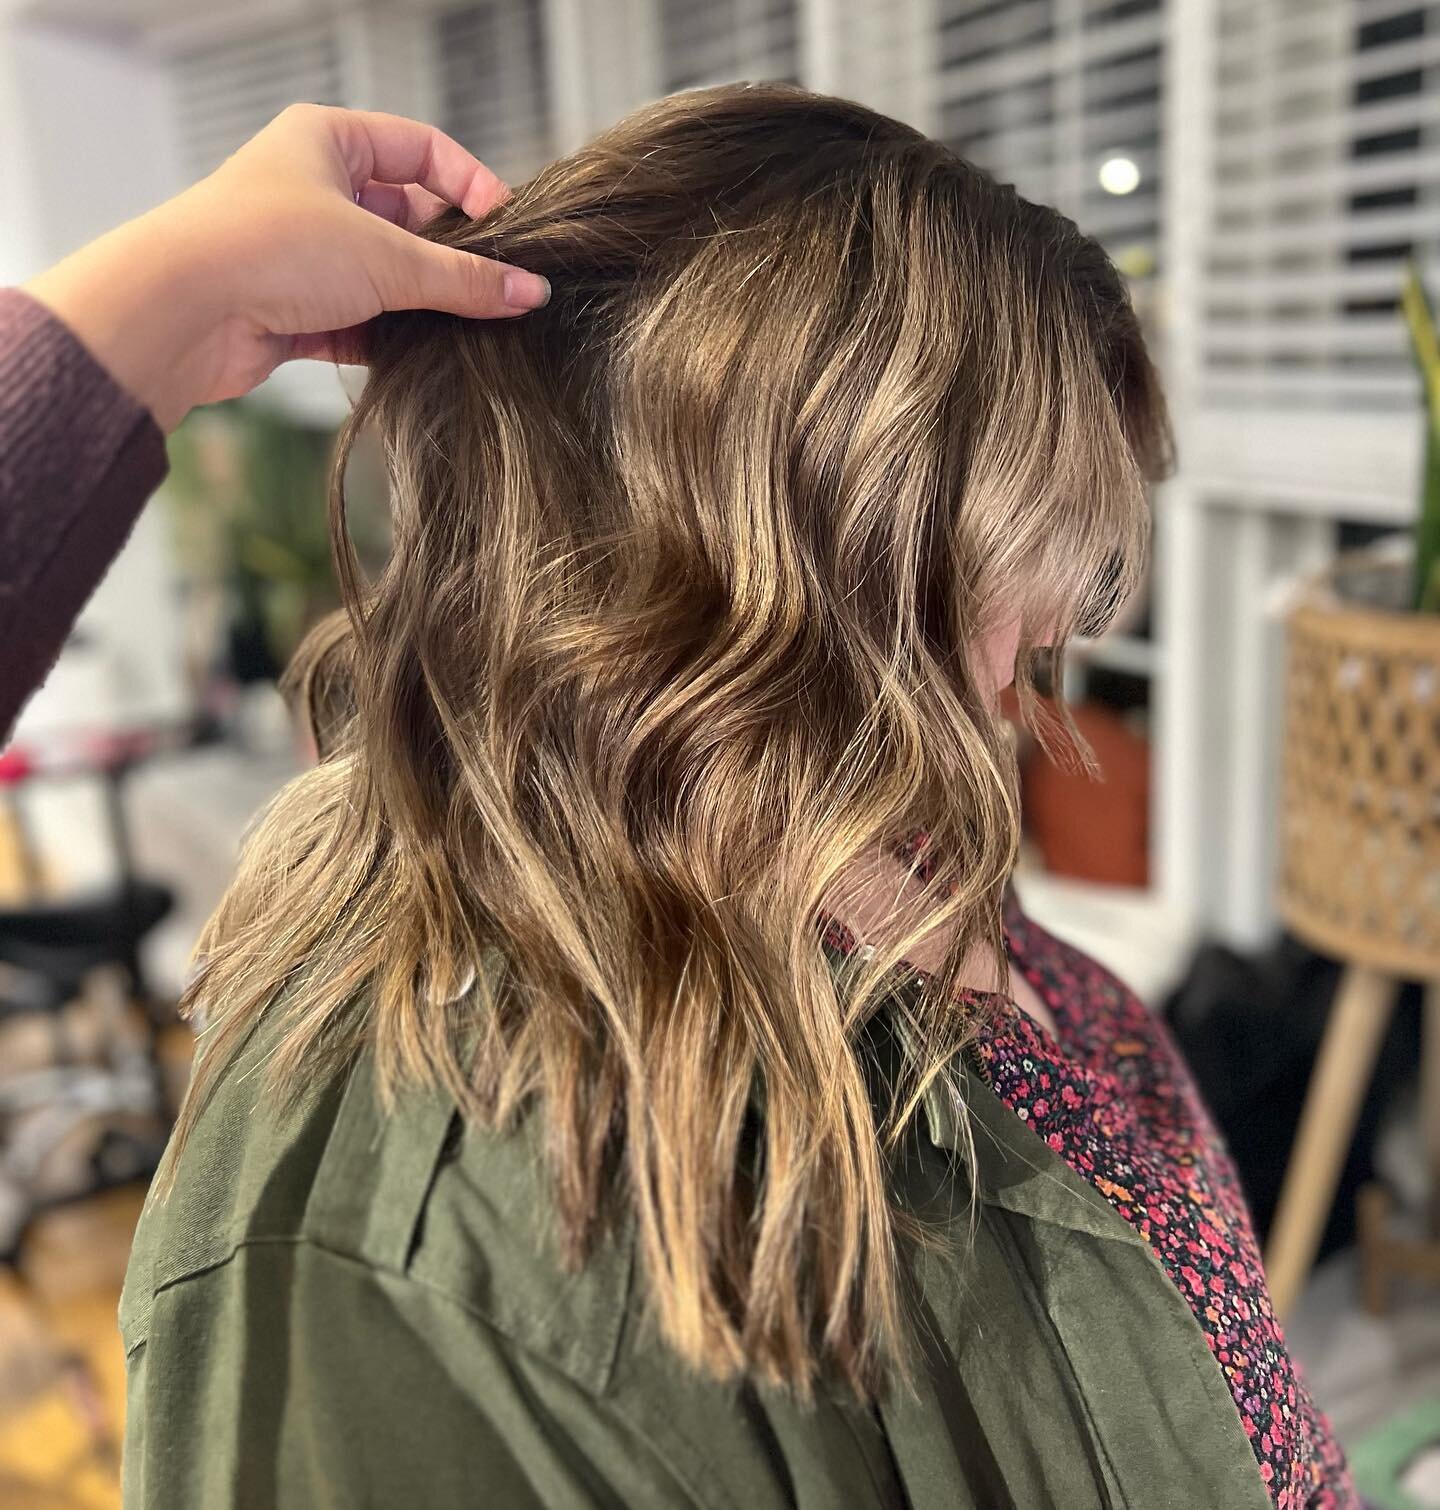 Reverse balayage on this angel 😍
- - - -

#stlstylist #stlhairstylist #stlhairsalon #stlhaircut #webstergrovesmo #websteruniversity #salonblvd #stlmodel #stlcolorist #brownhaircolor #hairtutorial #hairtrends #hairtips #brownhairstl #blondehairstl #b